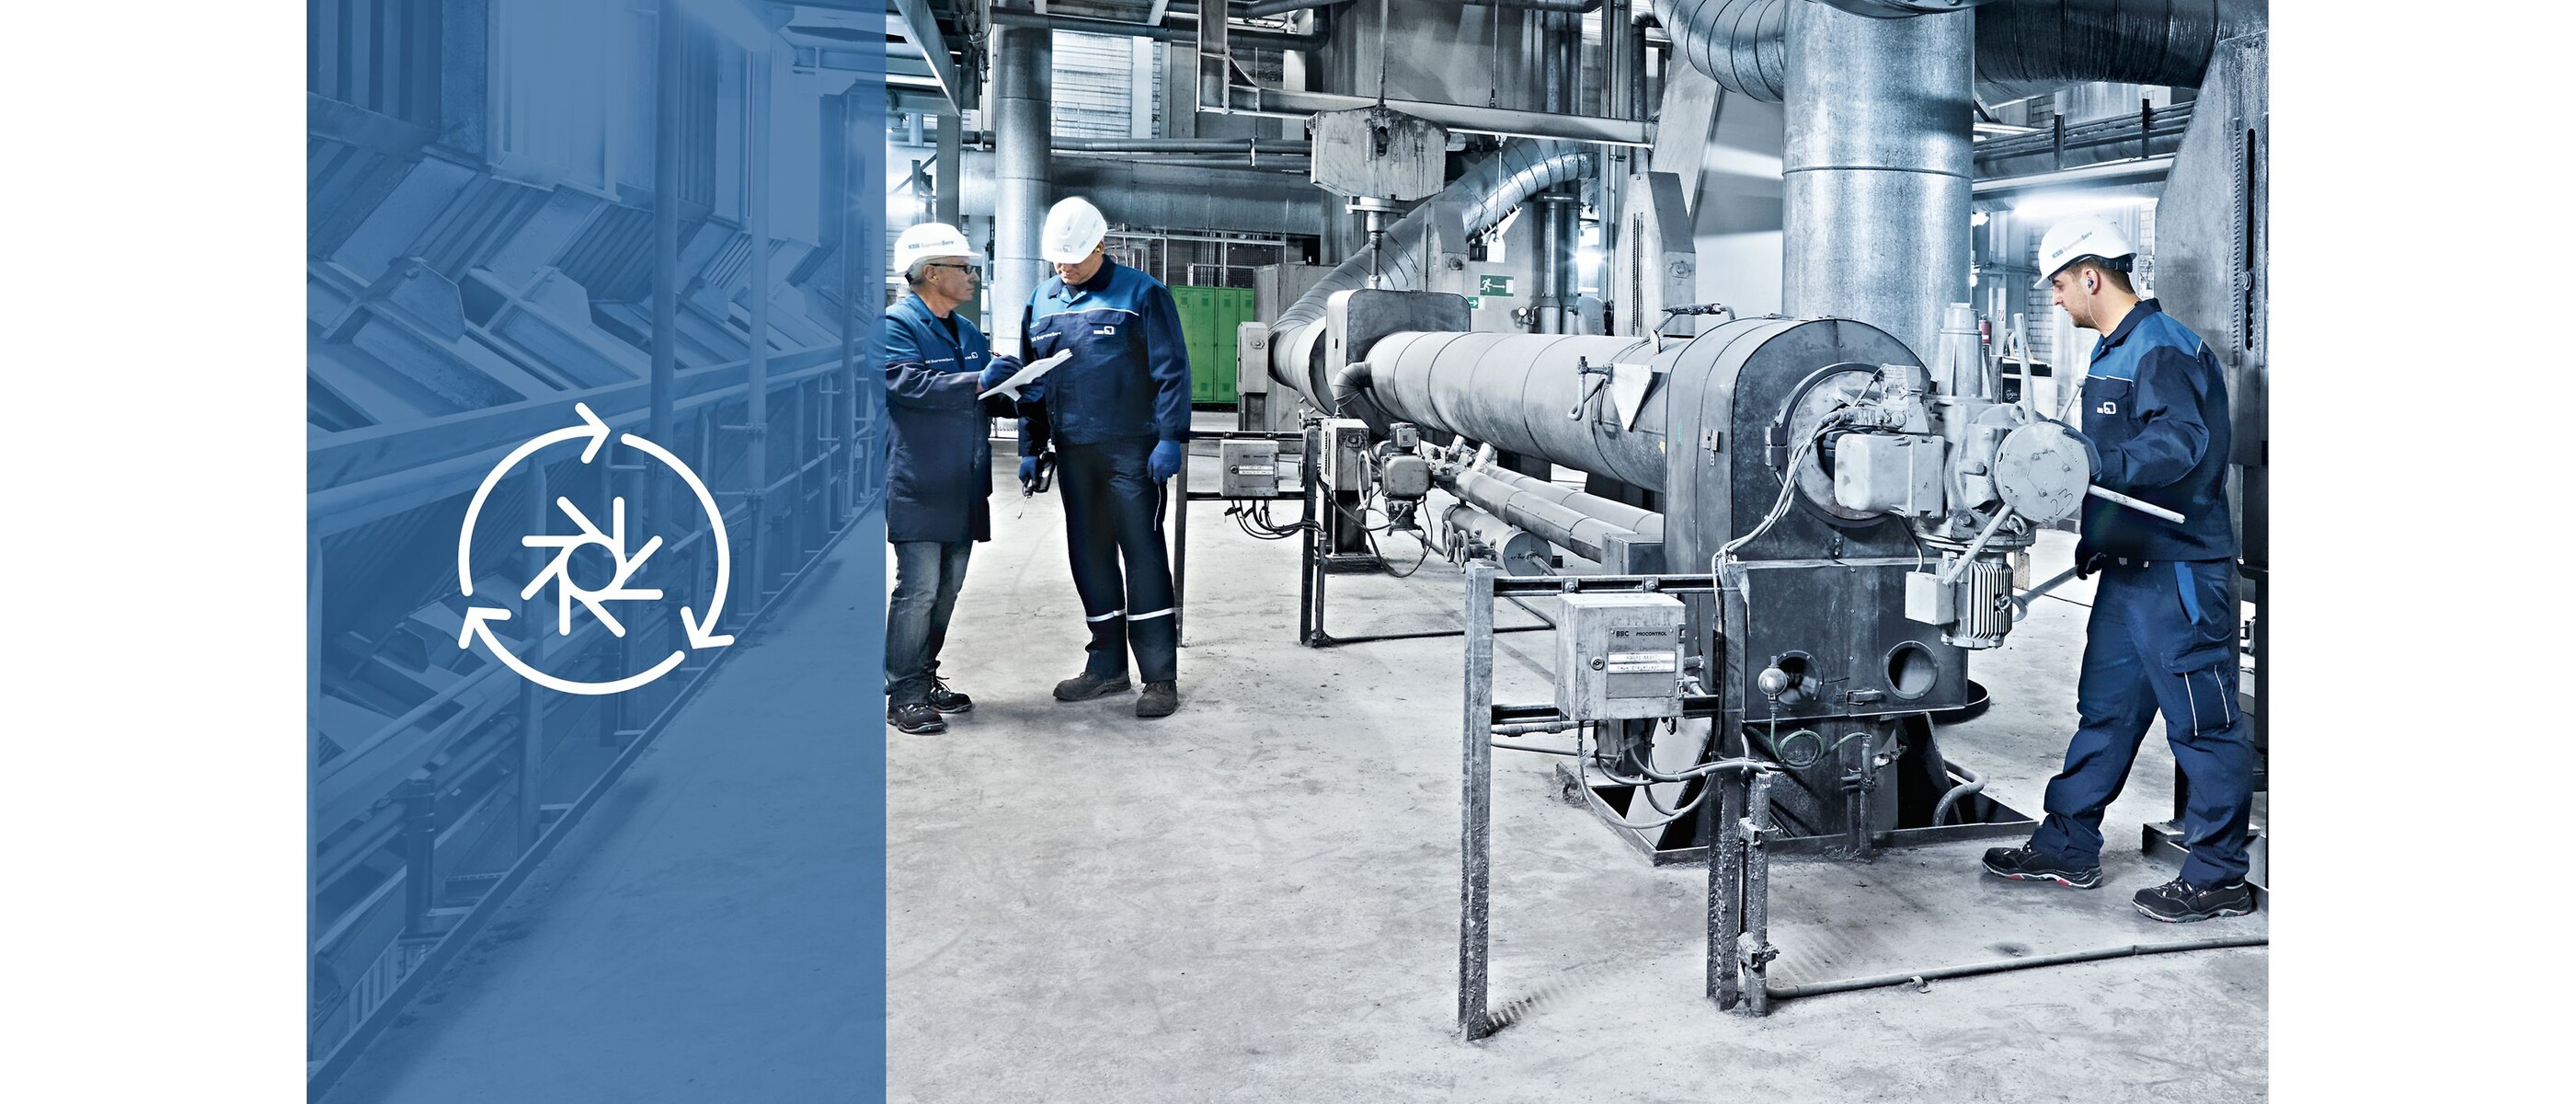 KSB service engineers during an inspection in a power plant